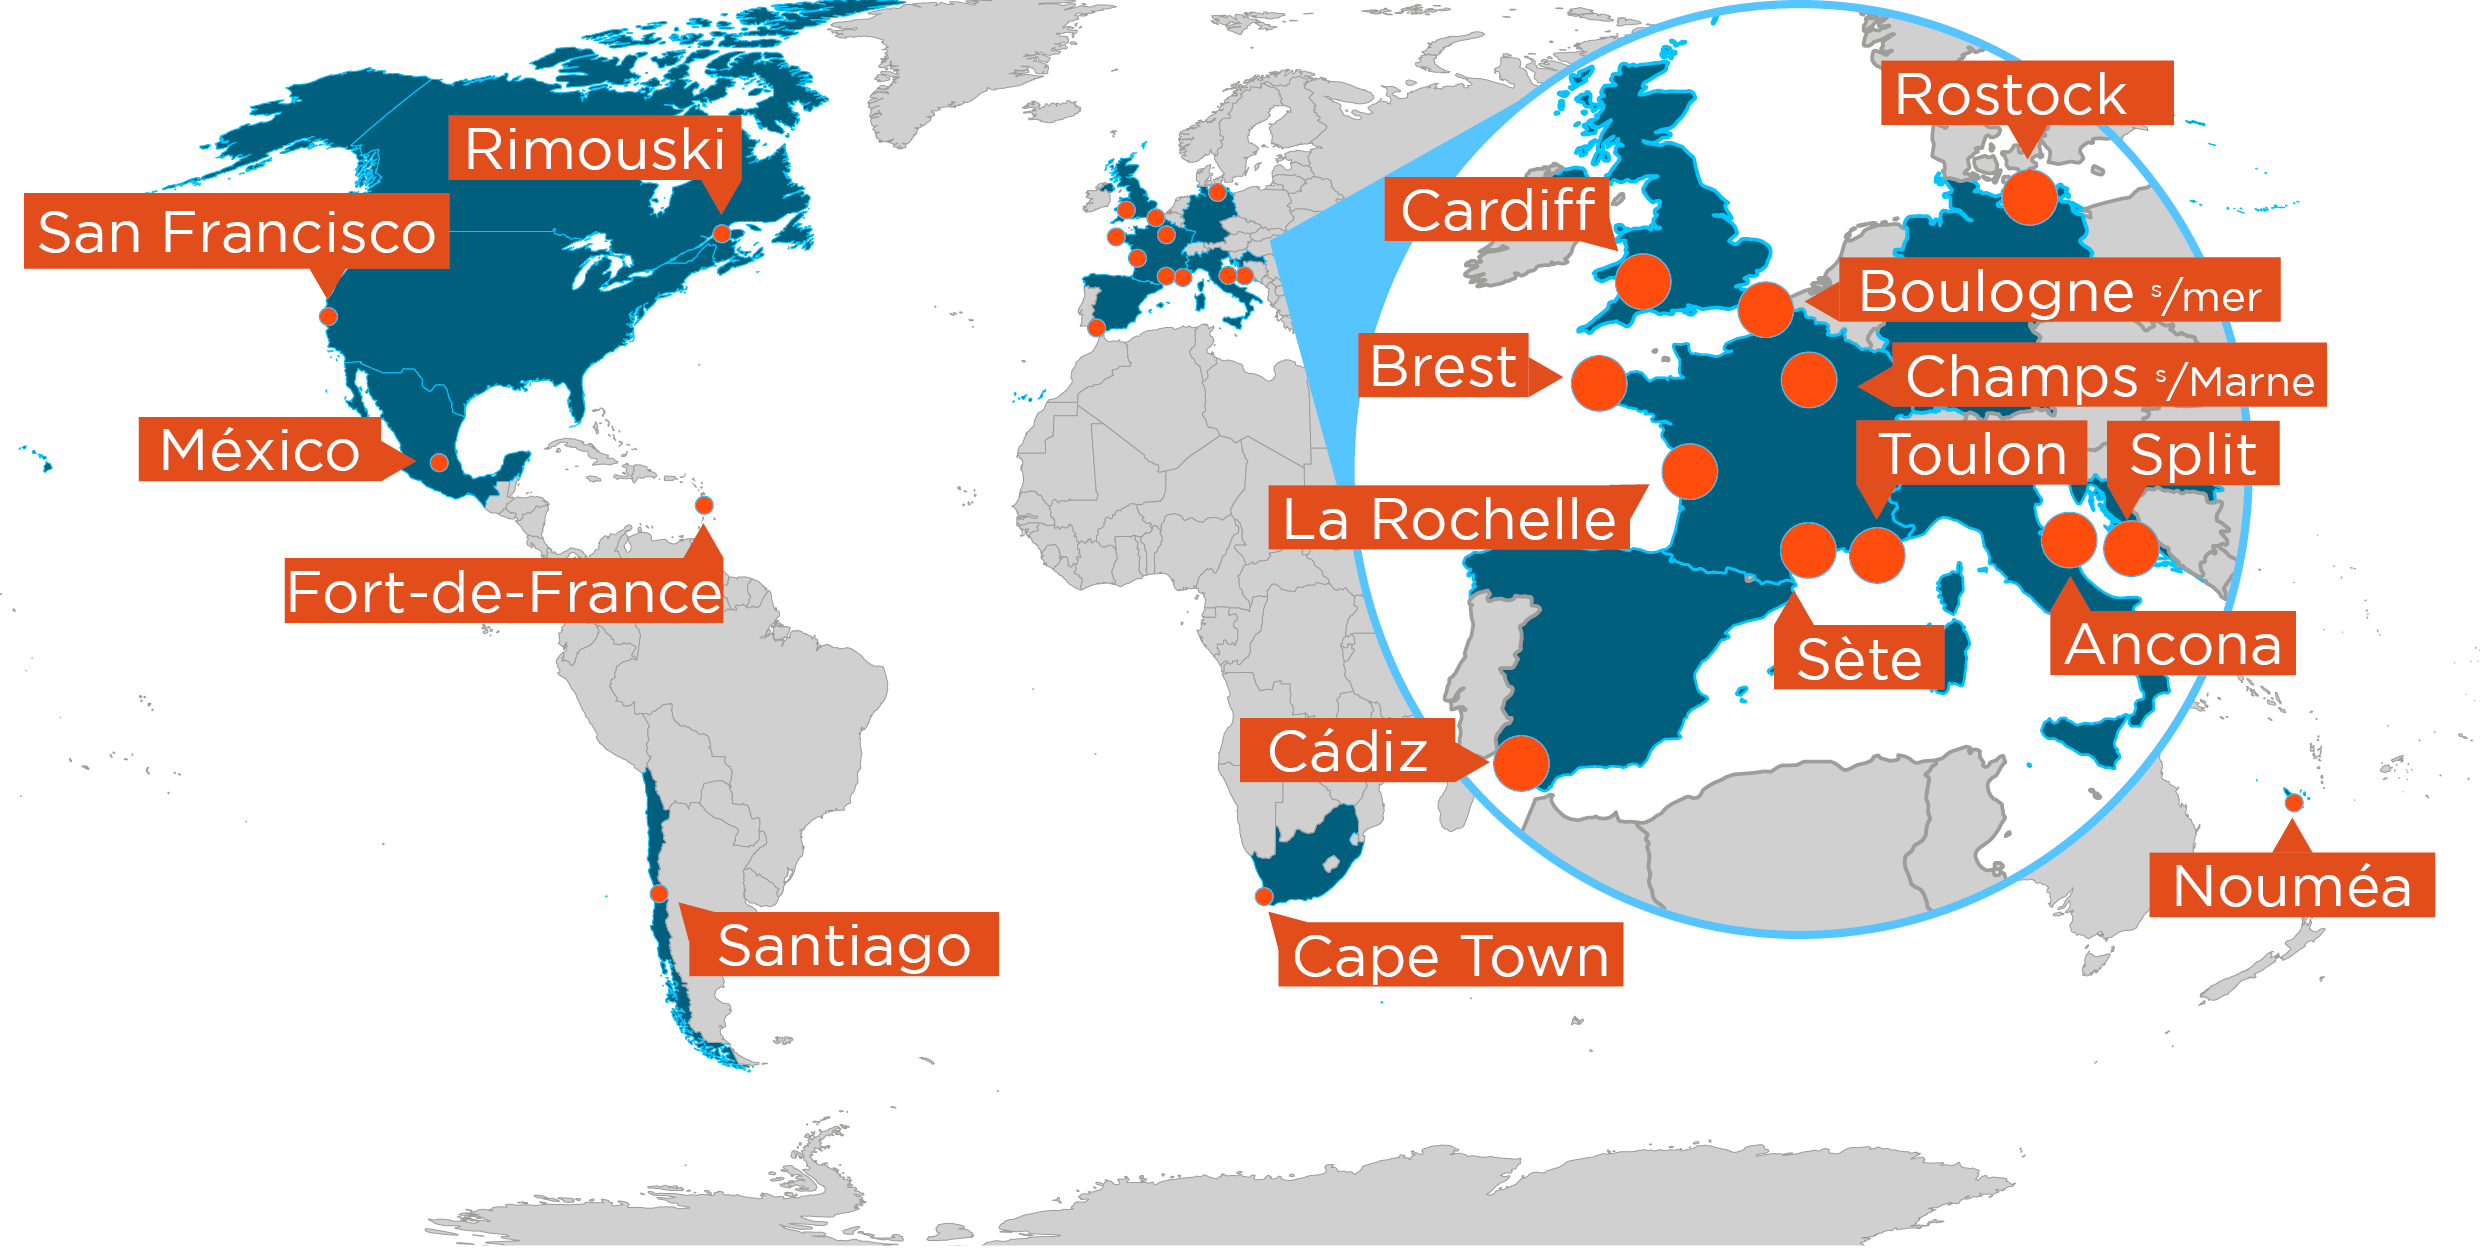 Map of the 18 cities participating in the event